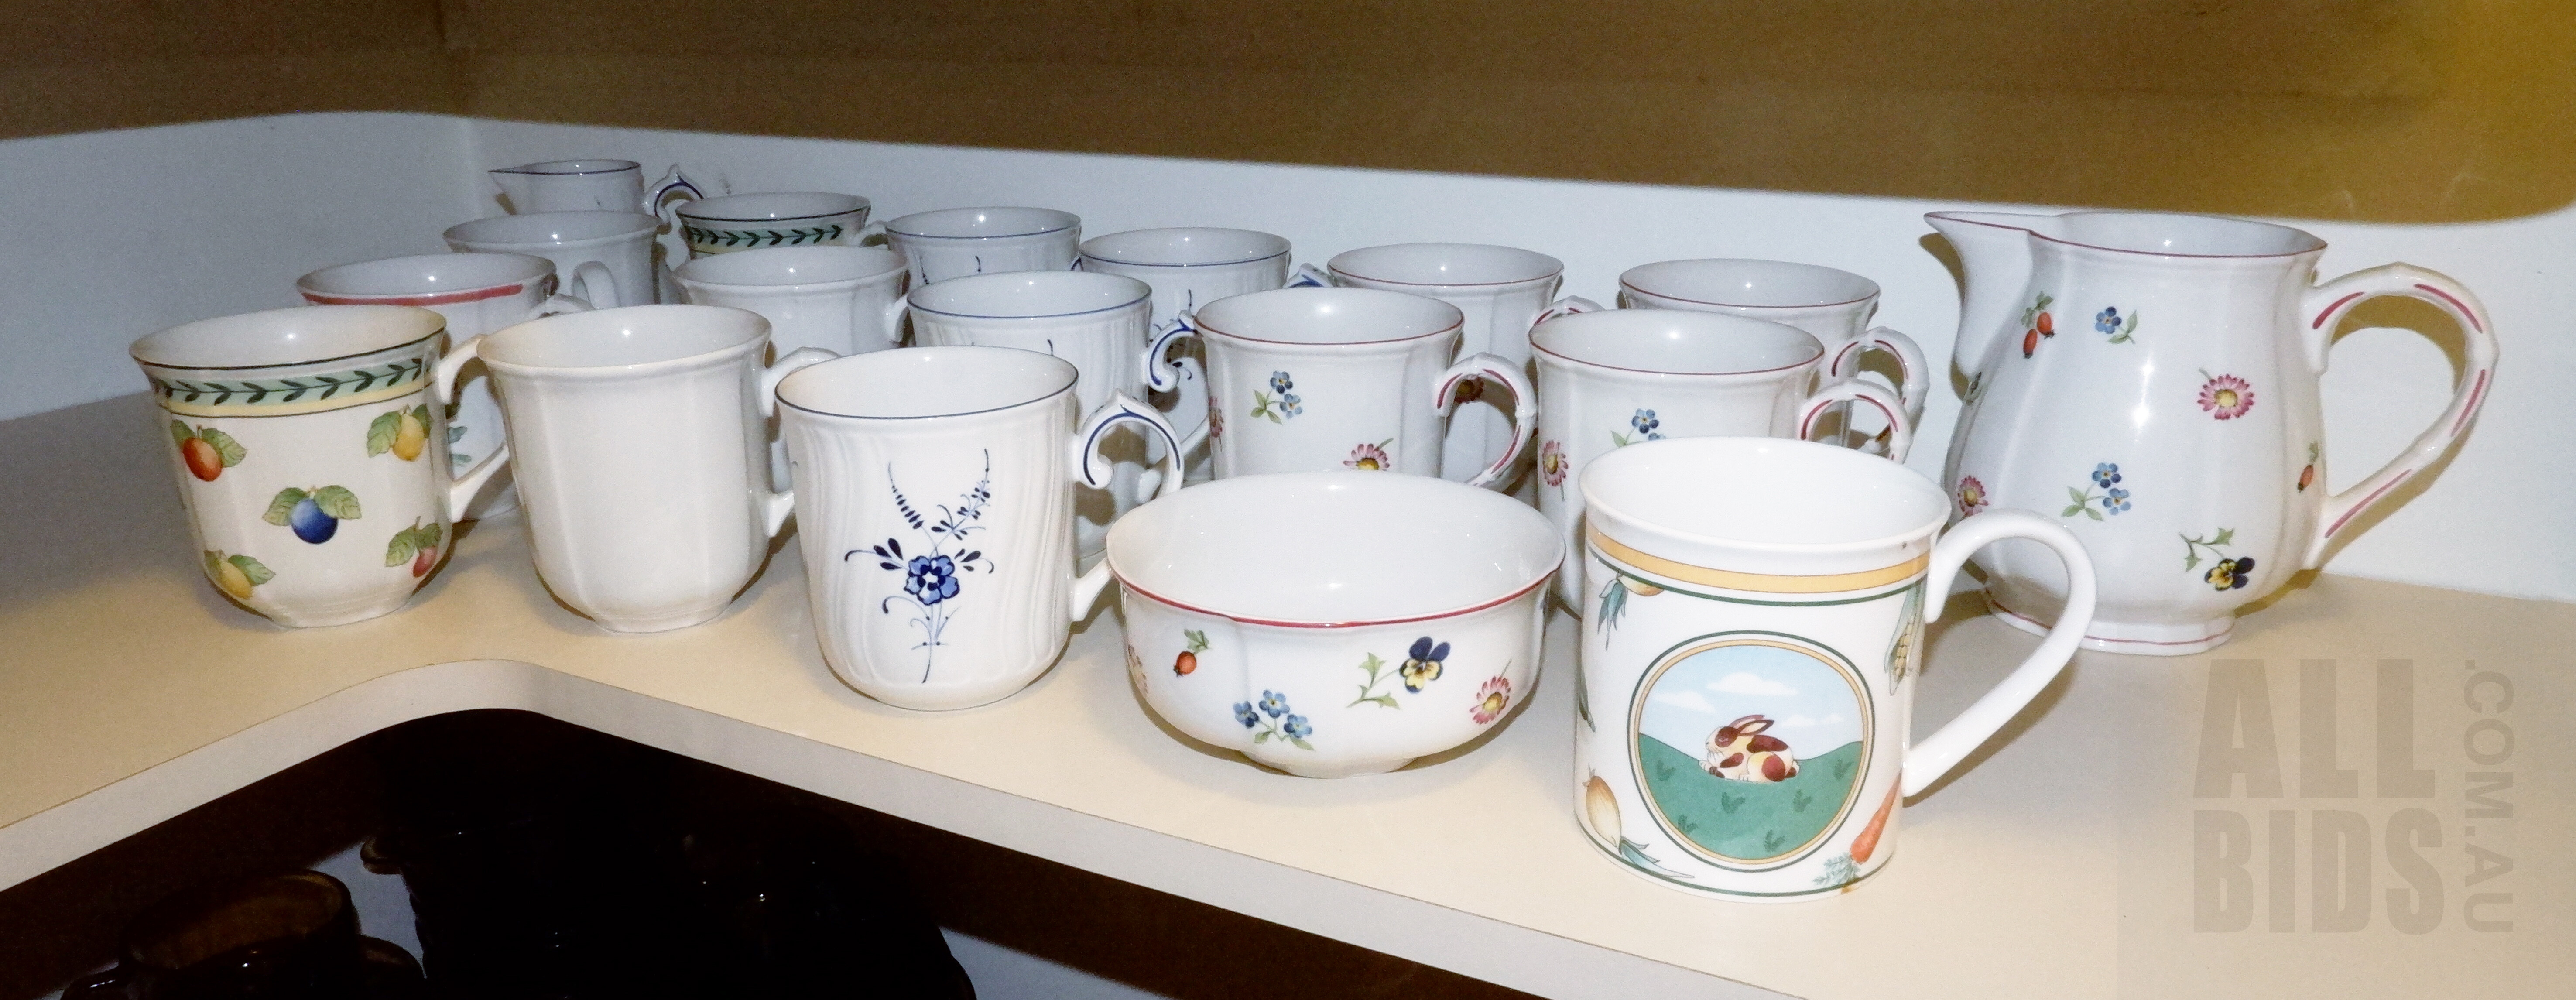 'Collection of Villeroy and Boch Mugs, Creamer Jugs and a Sugar Bowl, Including A La Ferme Les Animaux'